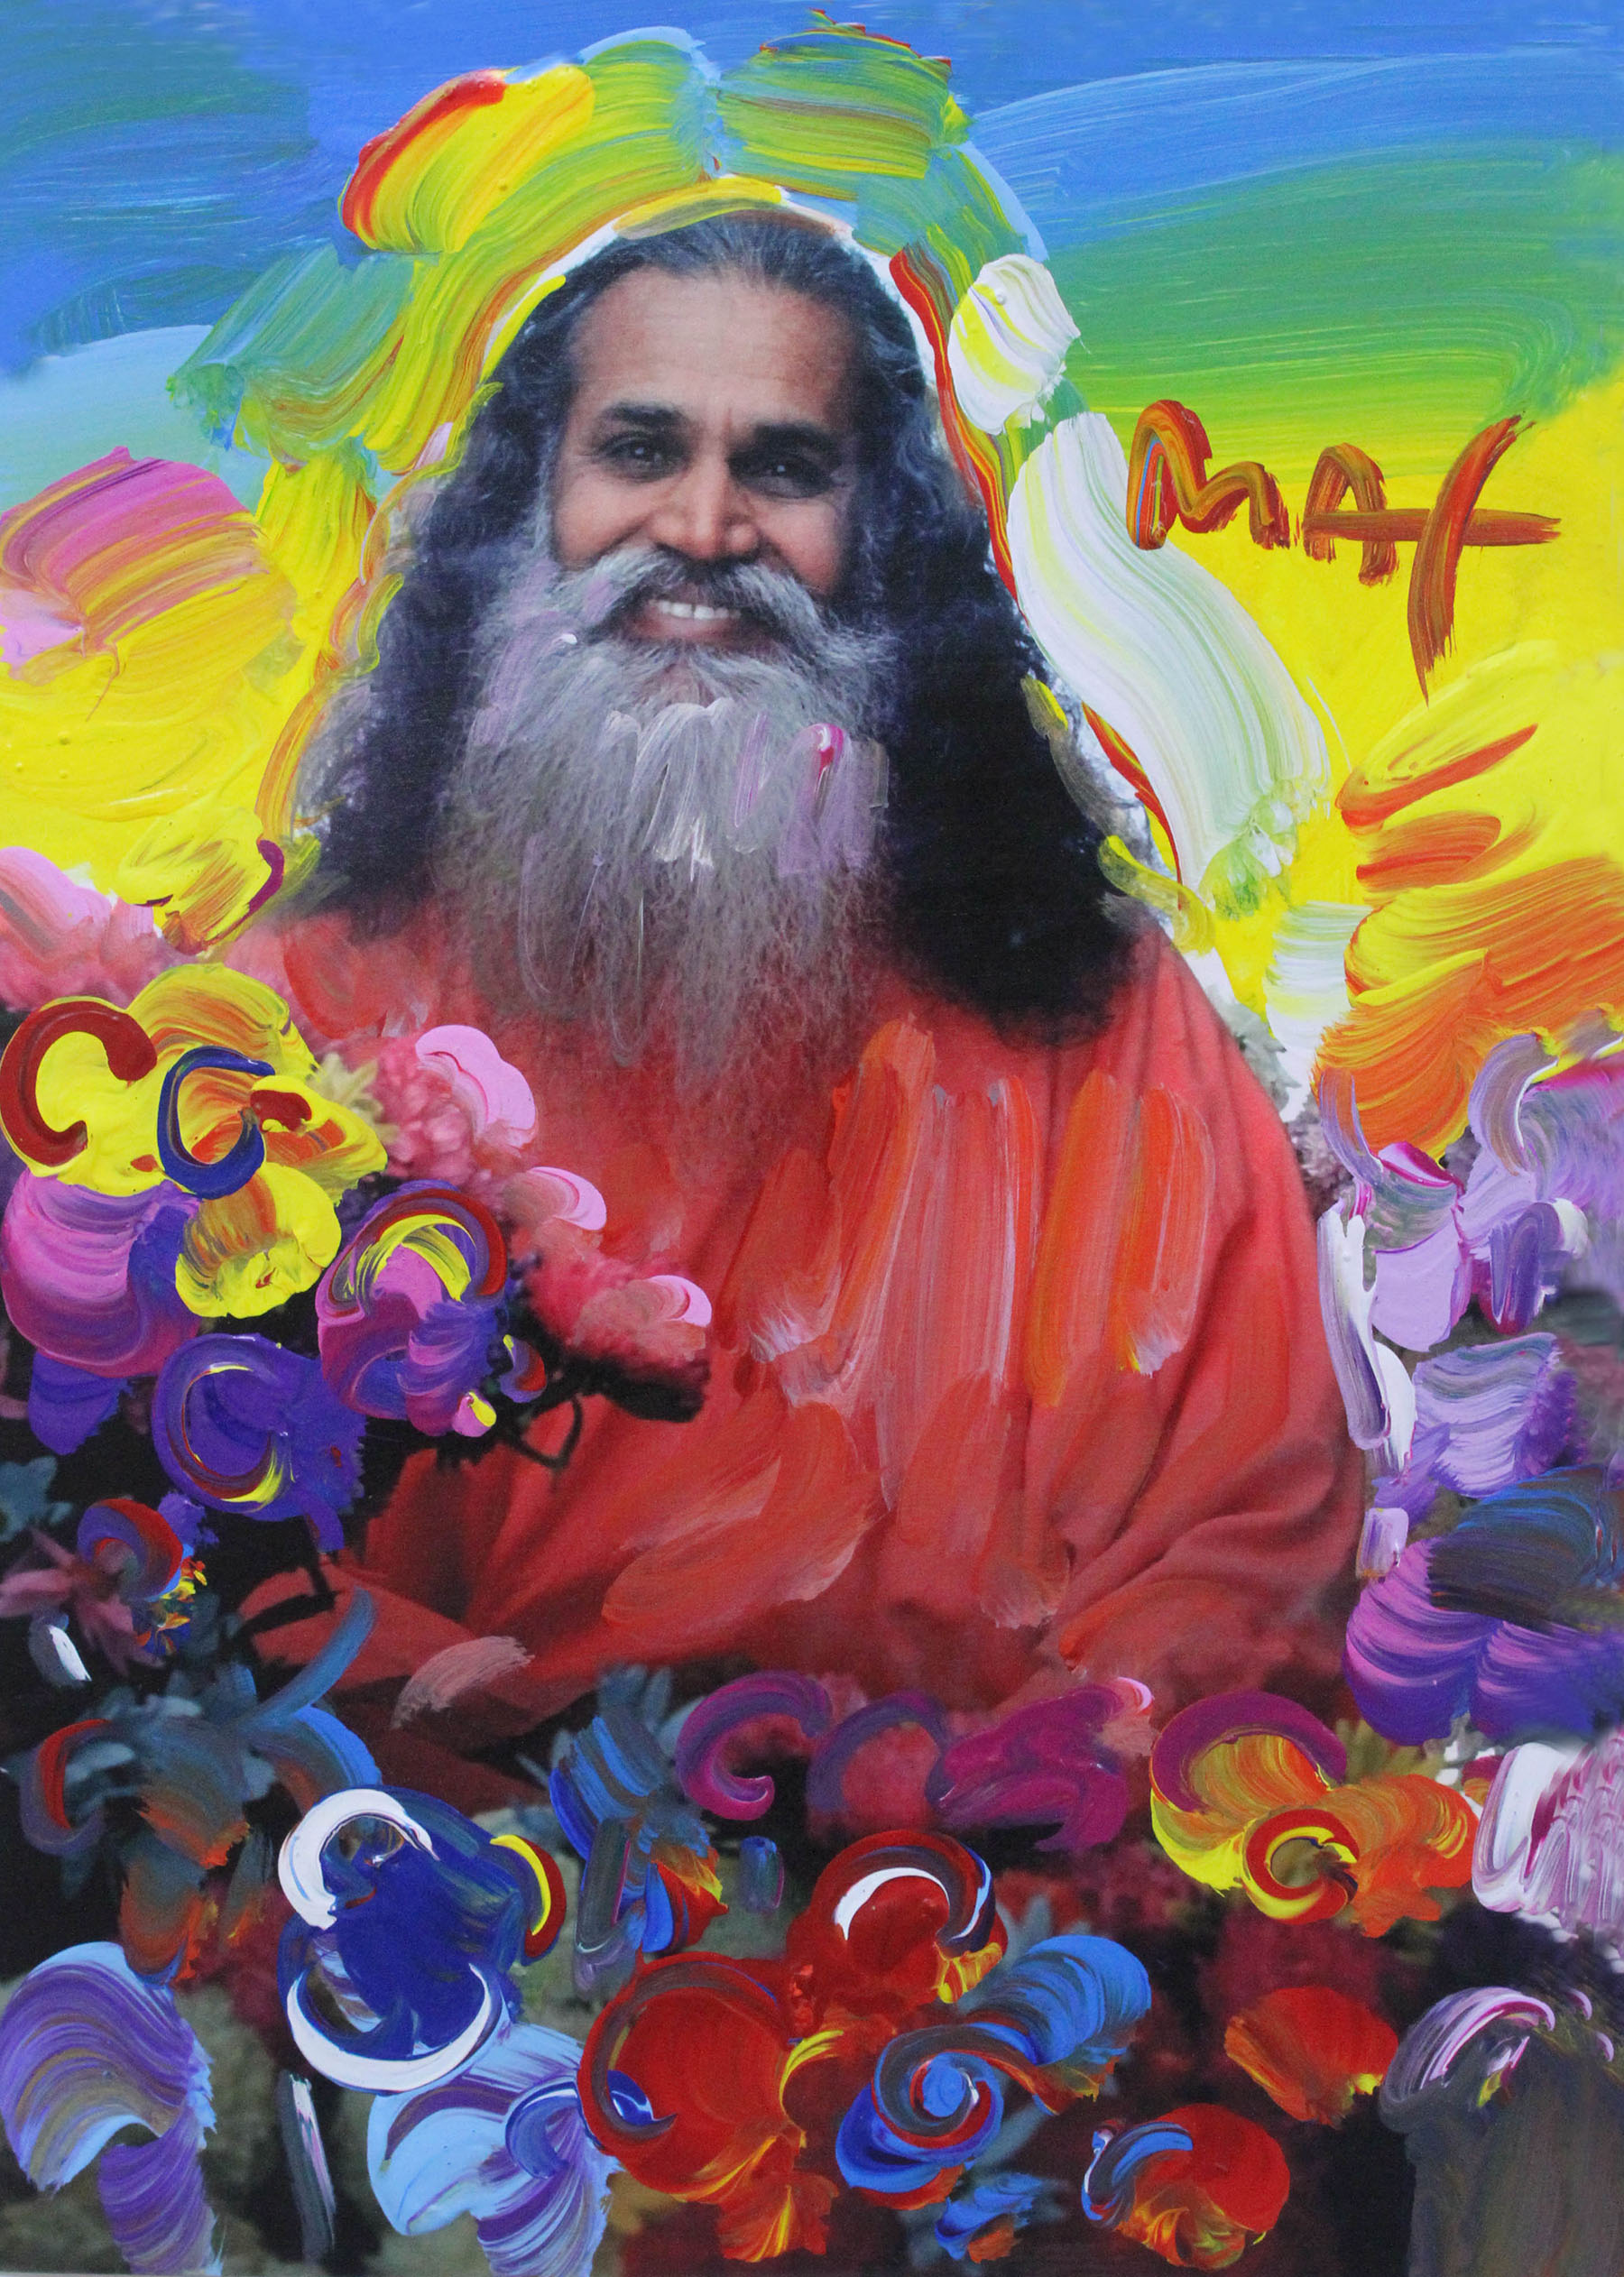 A portrait of Swami Satchidananda painted by Peter Max